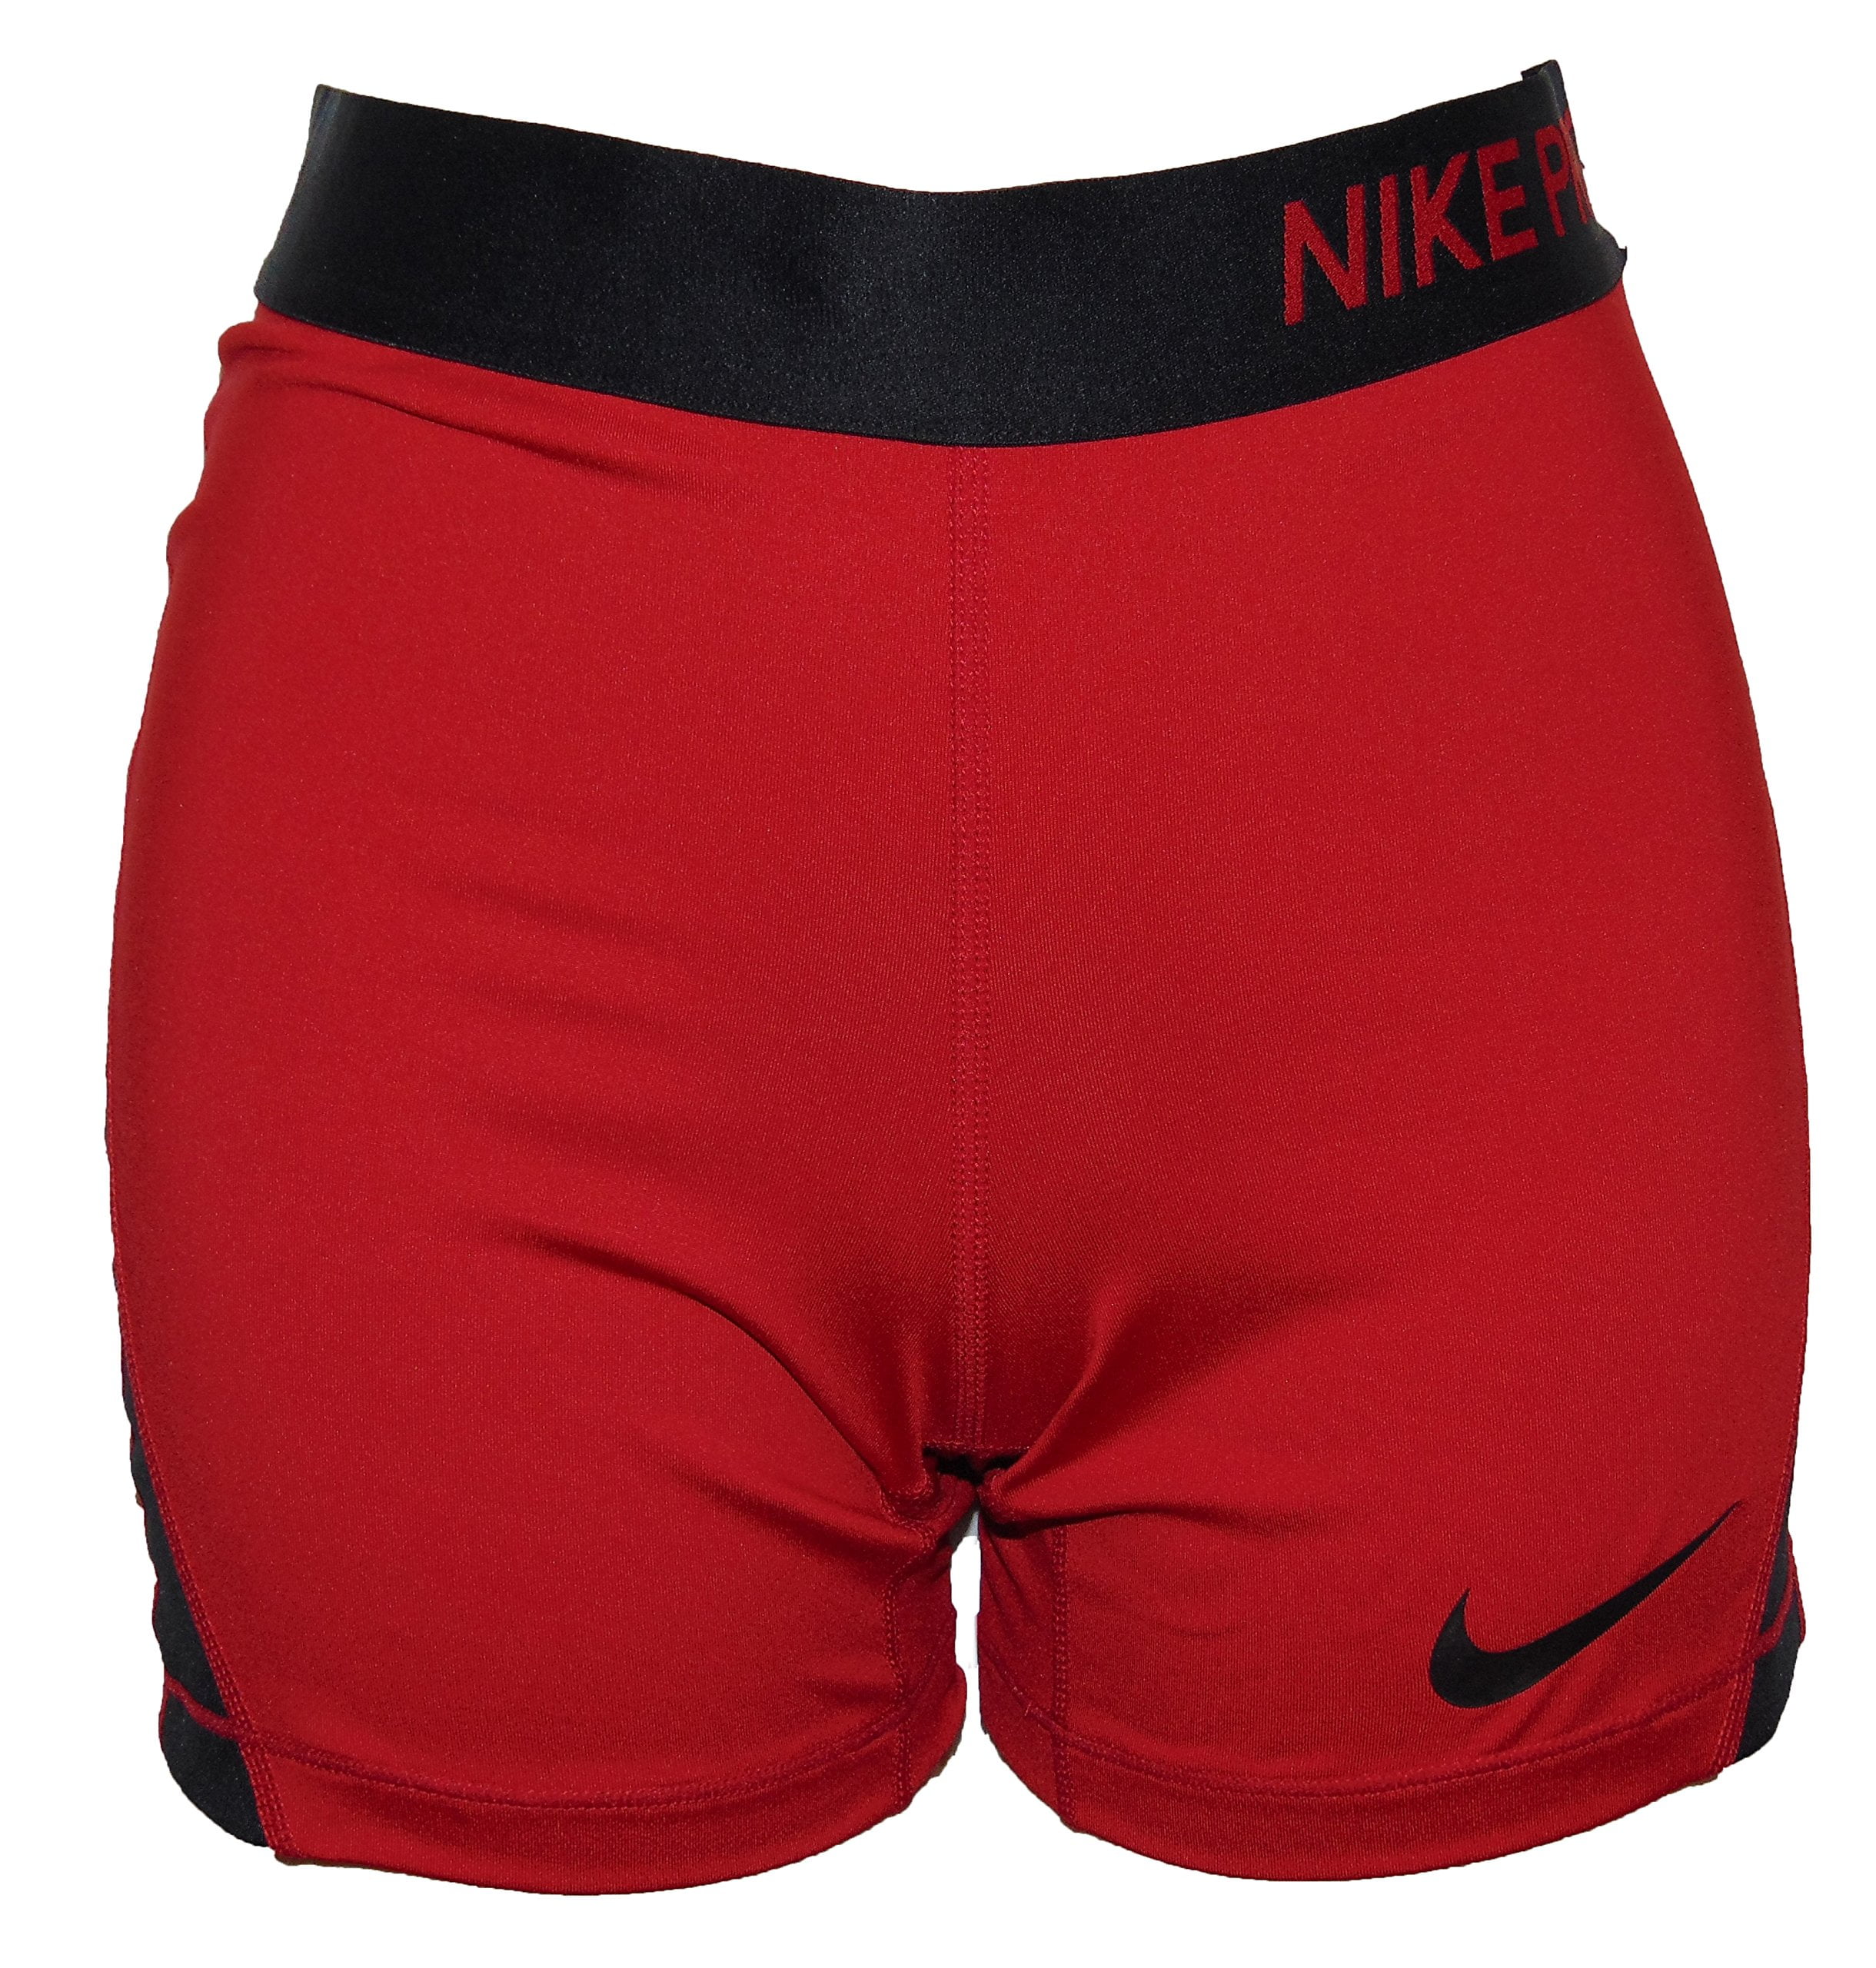 Mike Pro Girls Compression Shorts Polyester 